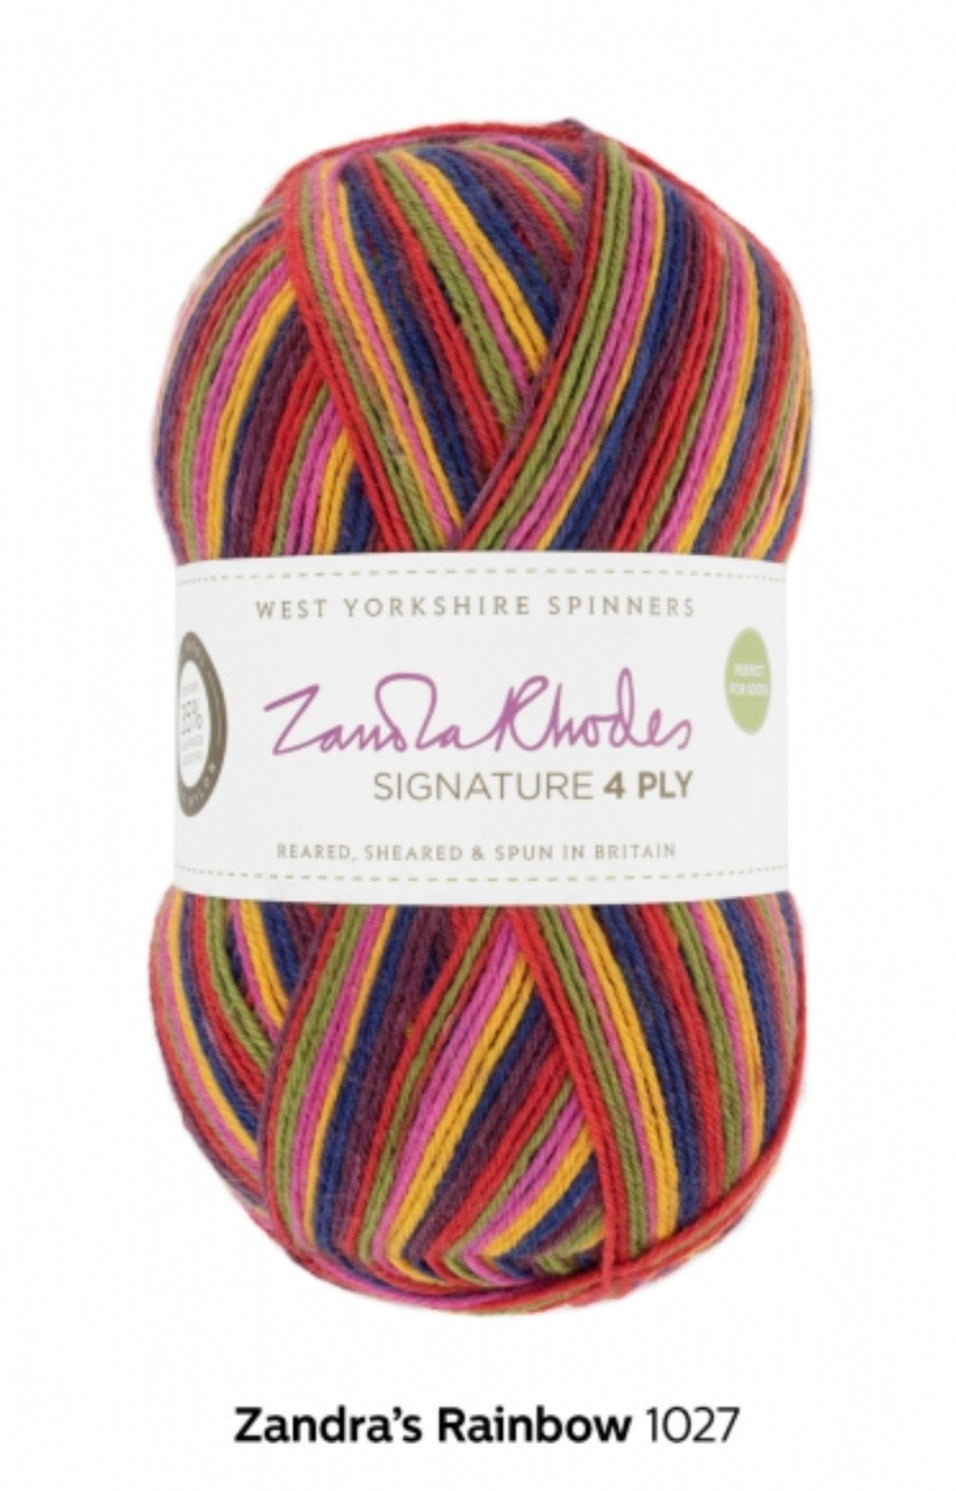 West Yorkshire Spinners Signature 4ply sock yarn. Zandra Rhodes collection